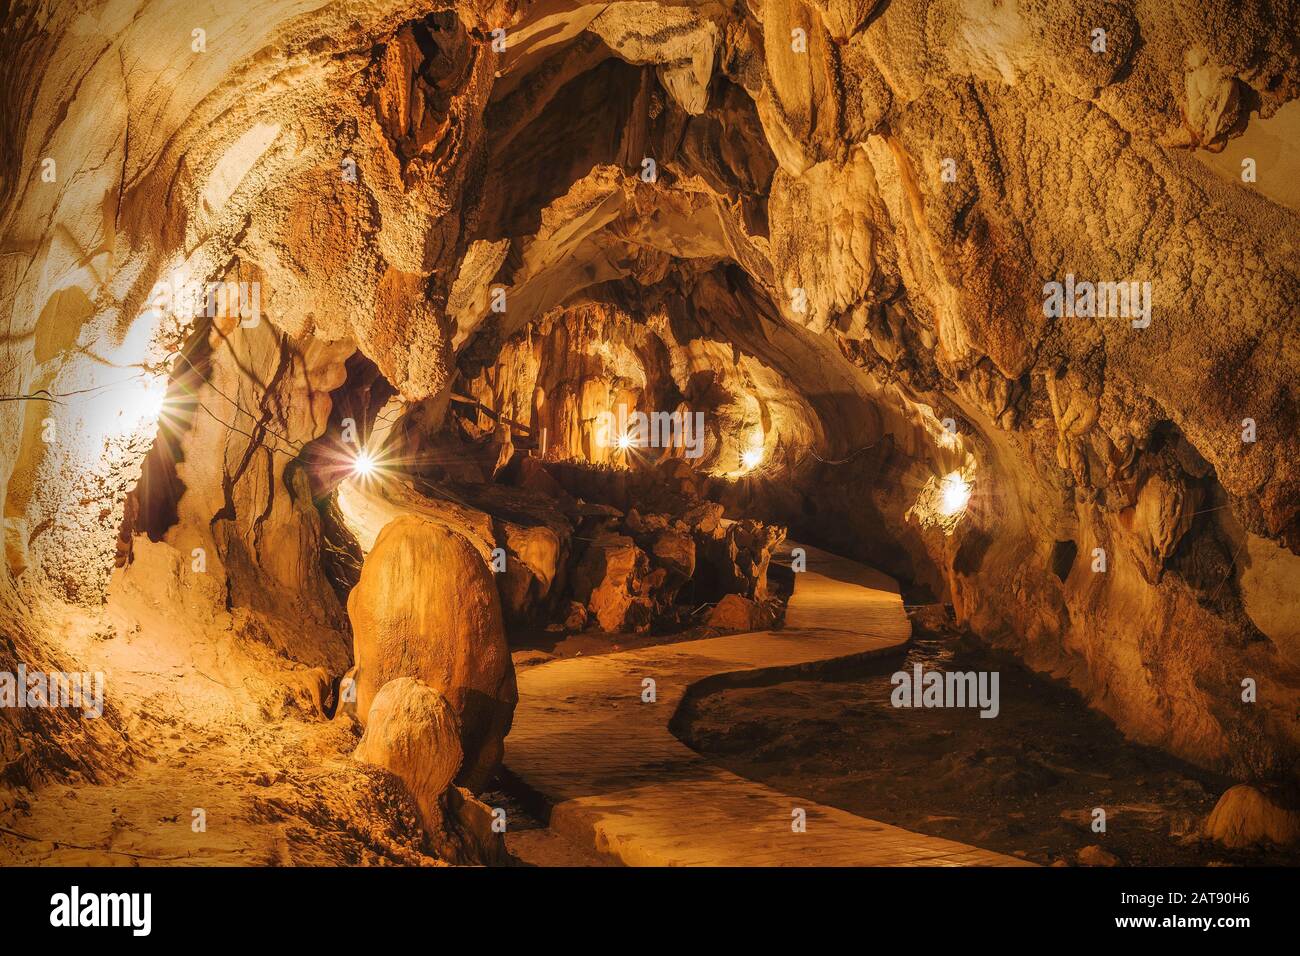 Tham Chang Cave in Vang Vieng, Vientiane Province, Laos. Stock Photo